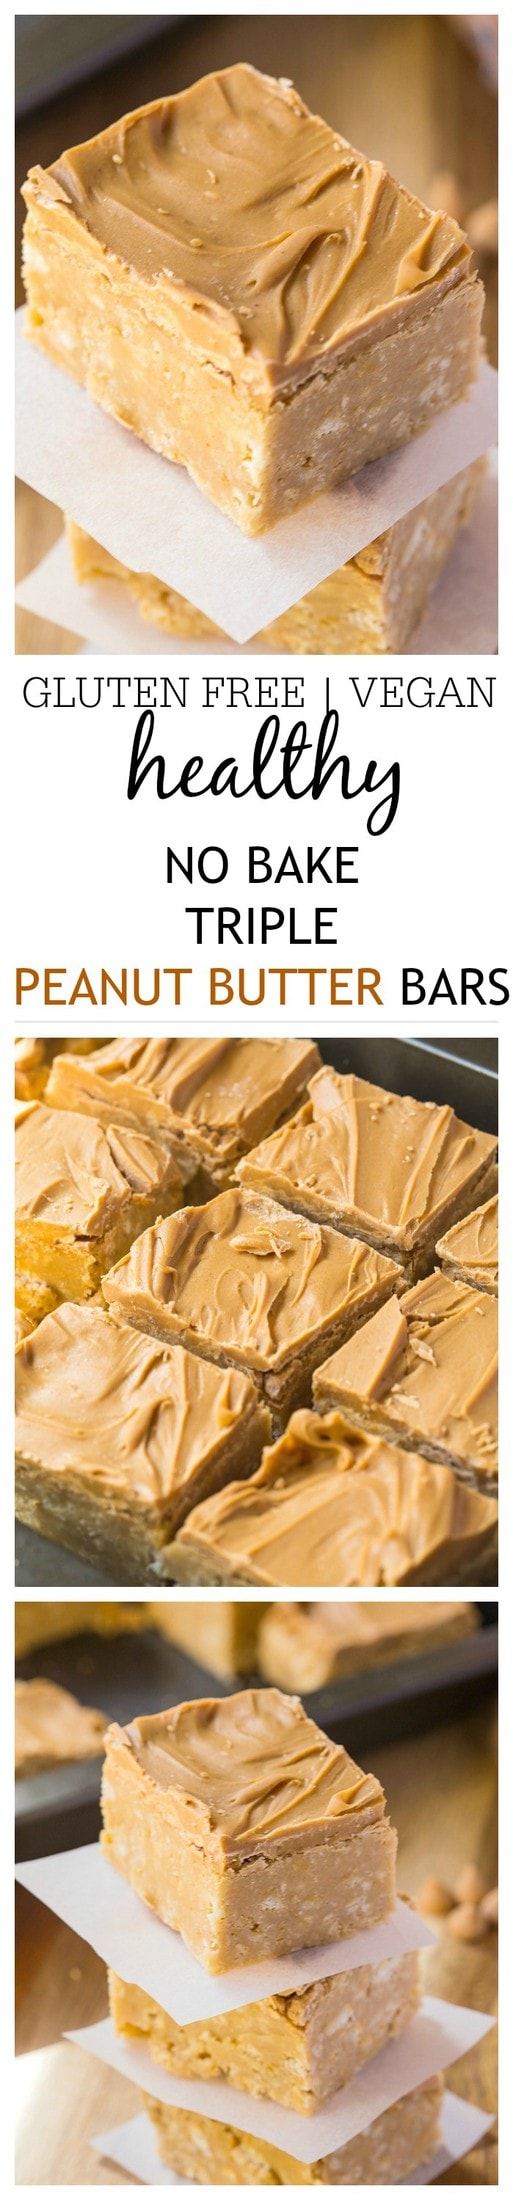 Healthy {No Bake} Triple Peanut Butter Bars- These healthy no bake triple peanut butter bars are the perfect treat or dessert for any peanut butter lover out there- This recipe comes with two versions, both gluten free and one is vegan- Quick, easy and ready in under 20 minutes! @thebigmansworld - thebigmansworld.com